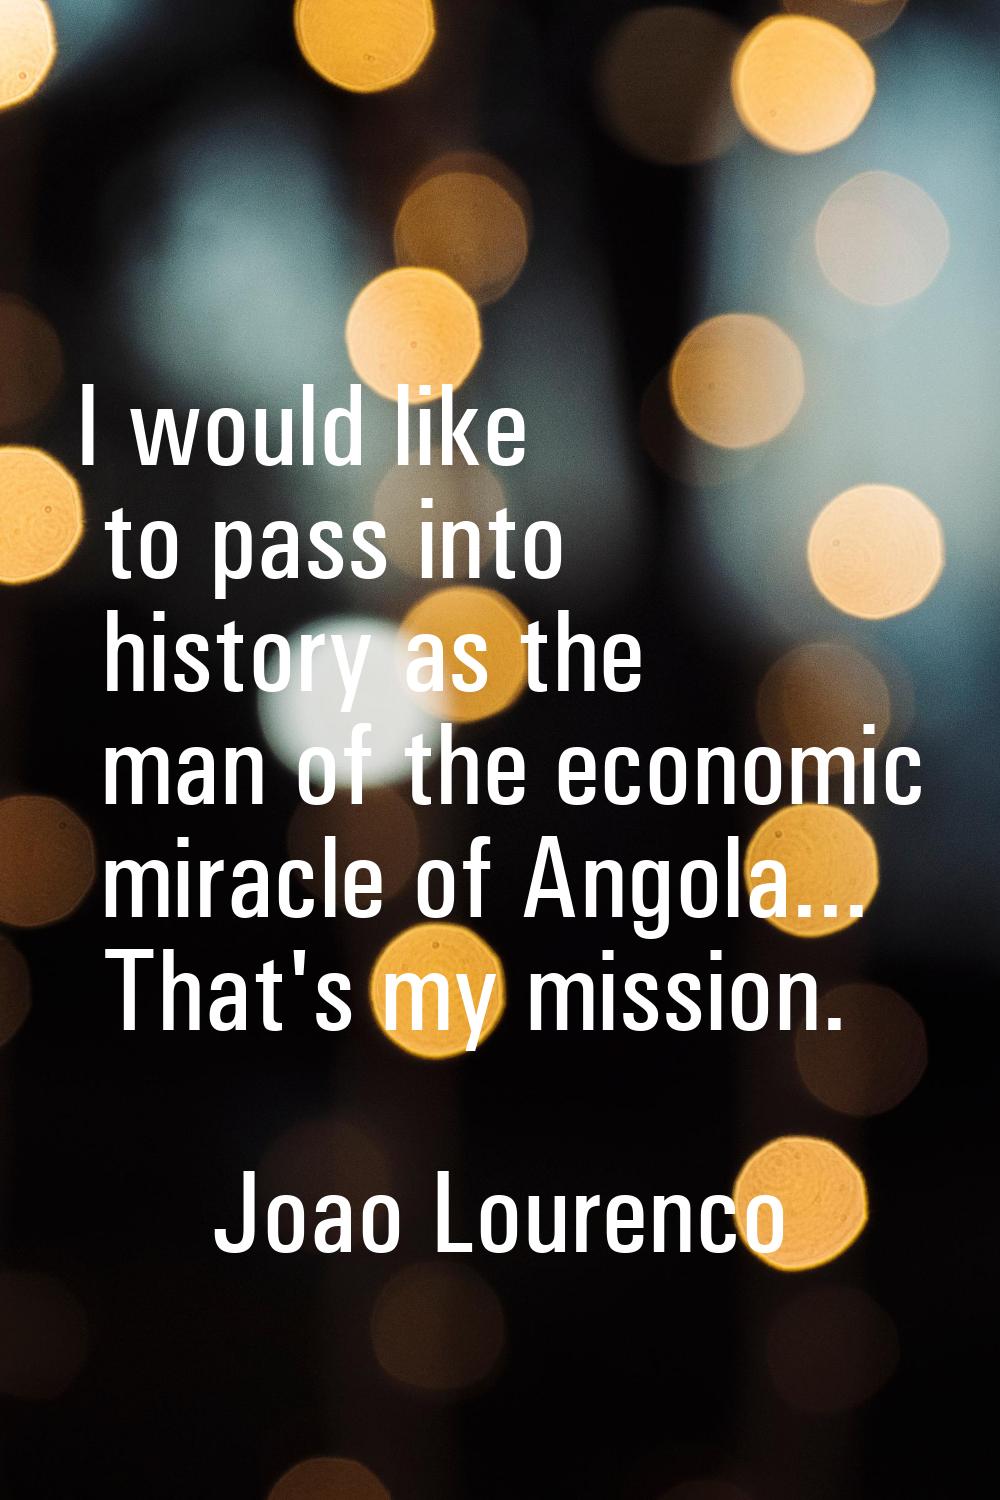 I would like to pass into history as the man of the economic miracle of Angola... That's my mission